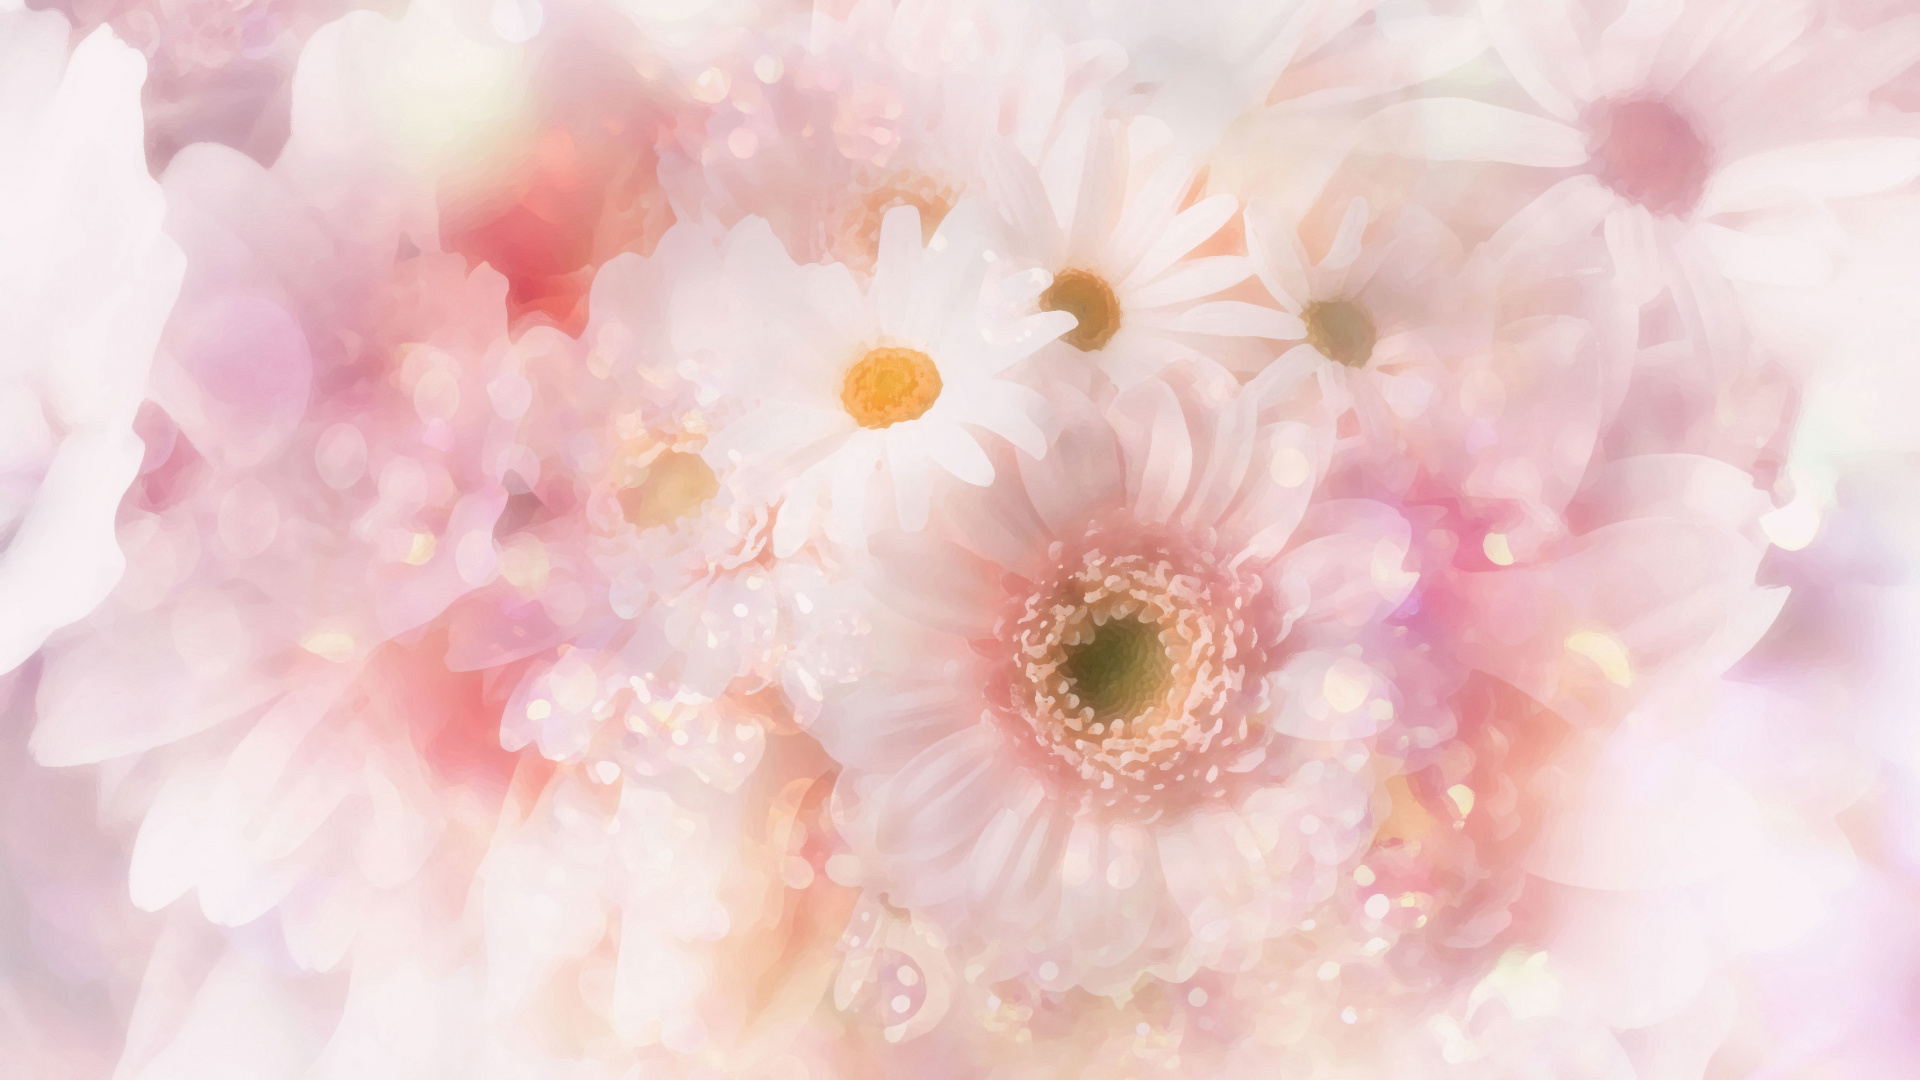 White and Pink Daisy Flower. Wallpaper in 1920x1080 Resolution